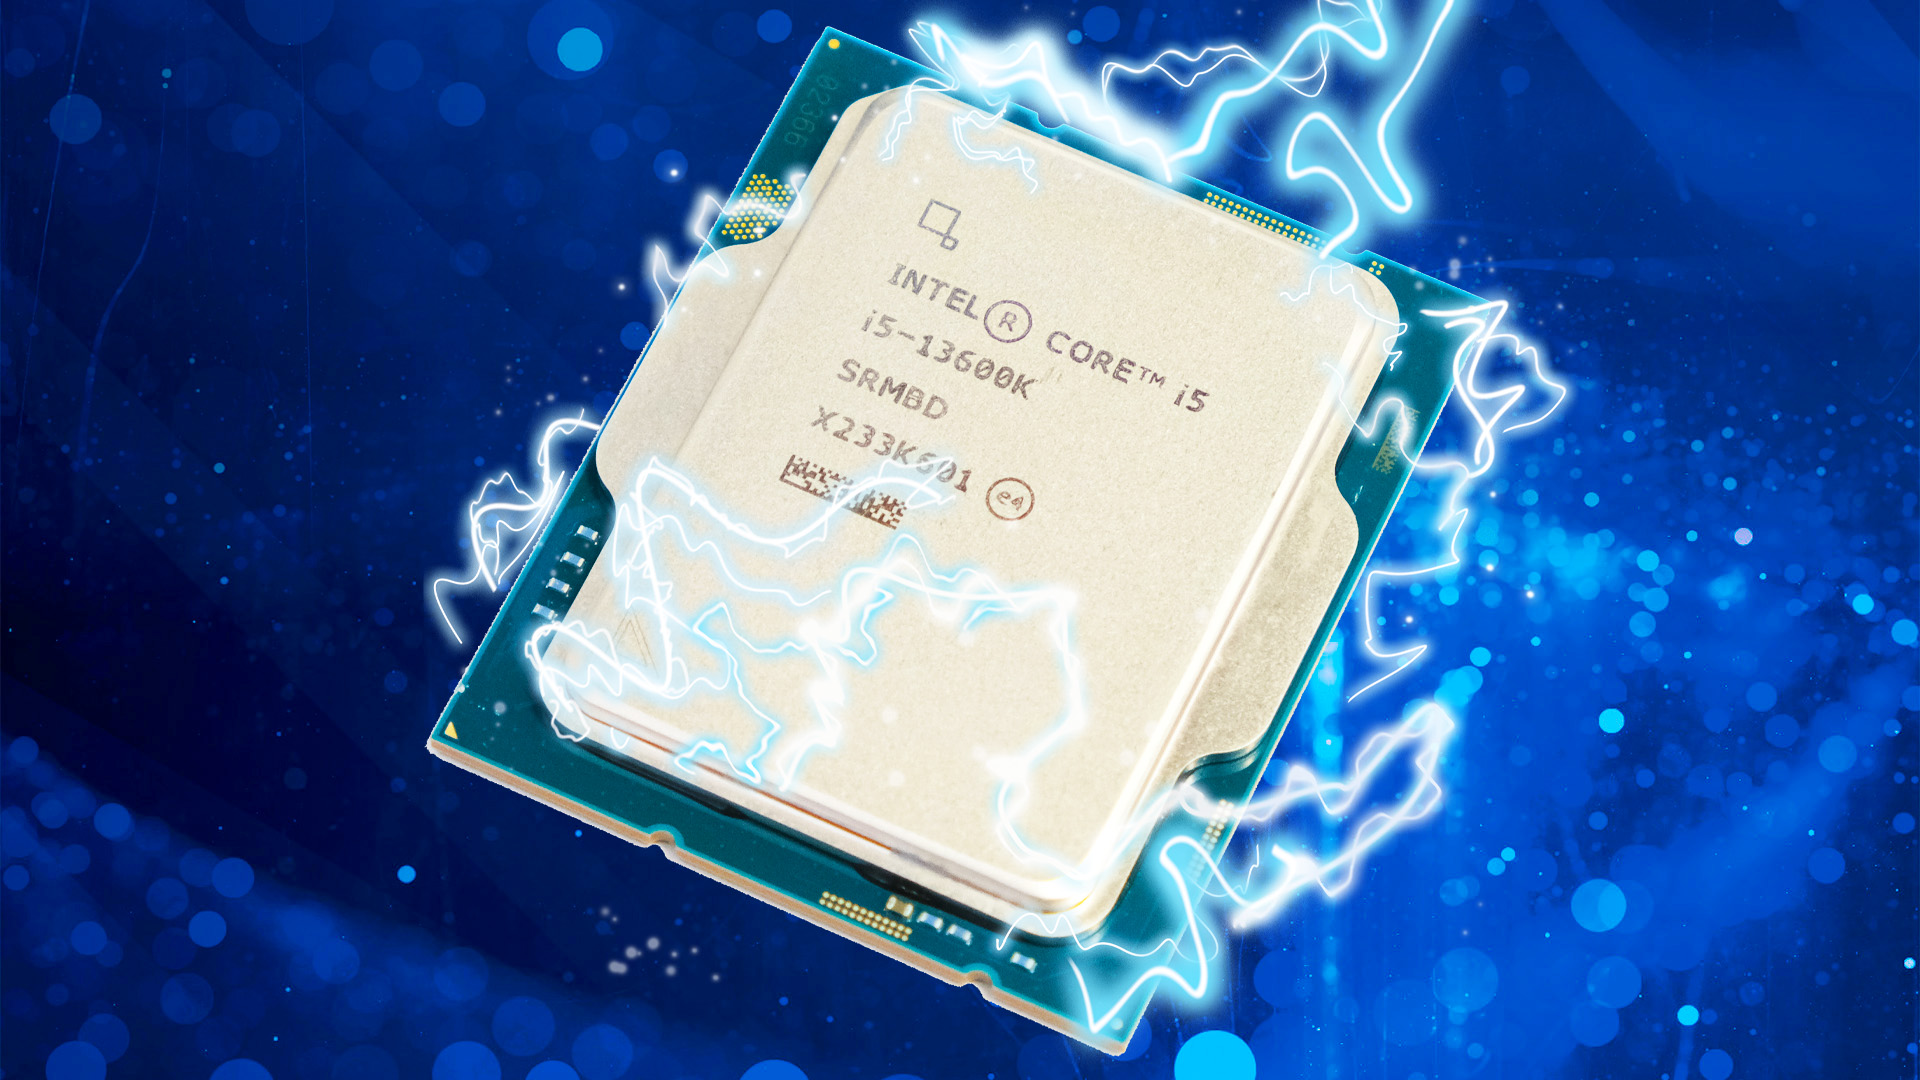 Intel core i5-13600K review - is the 13600K worth it?